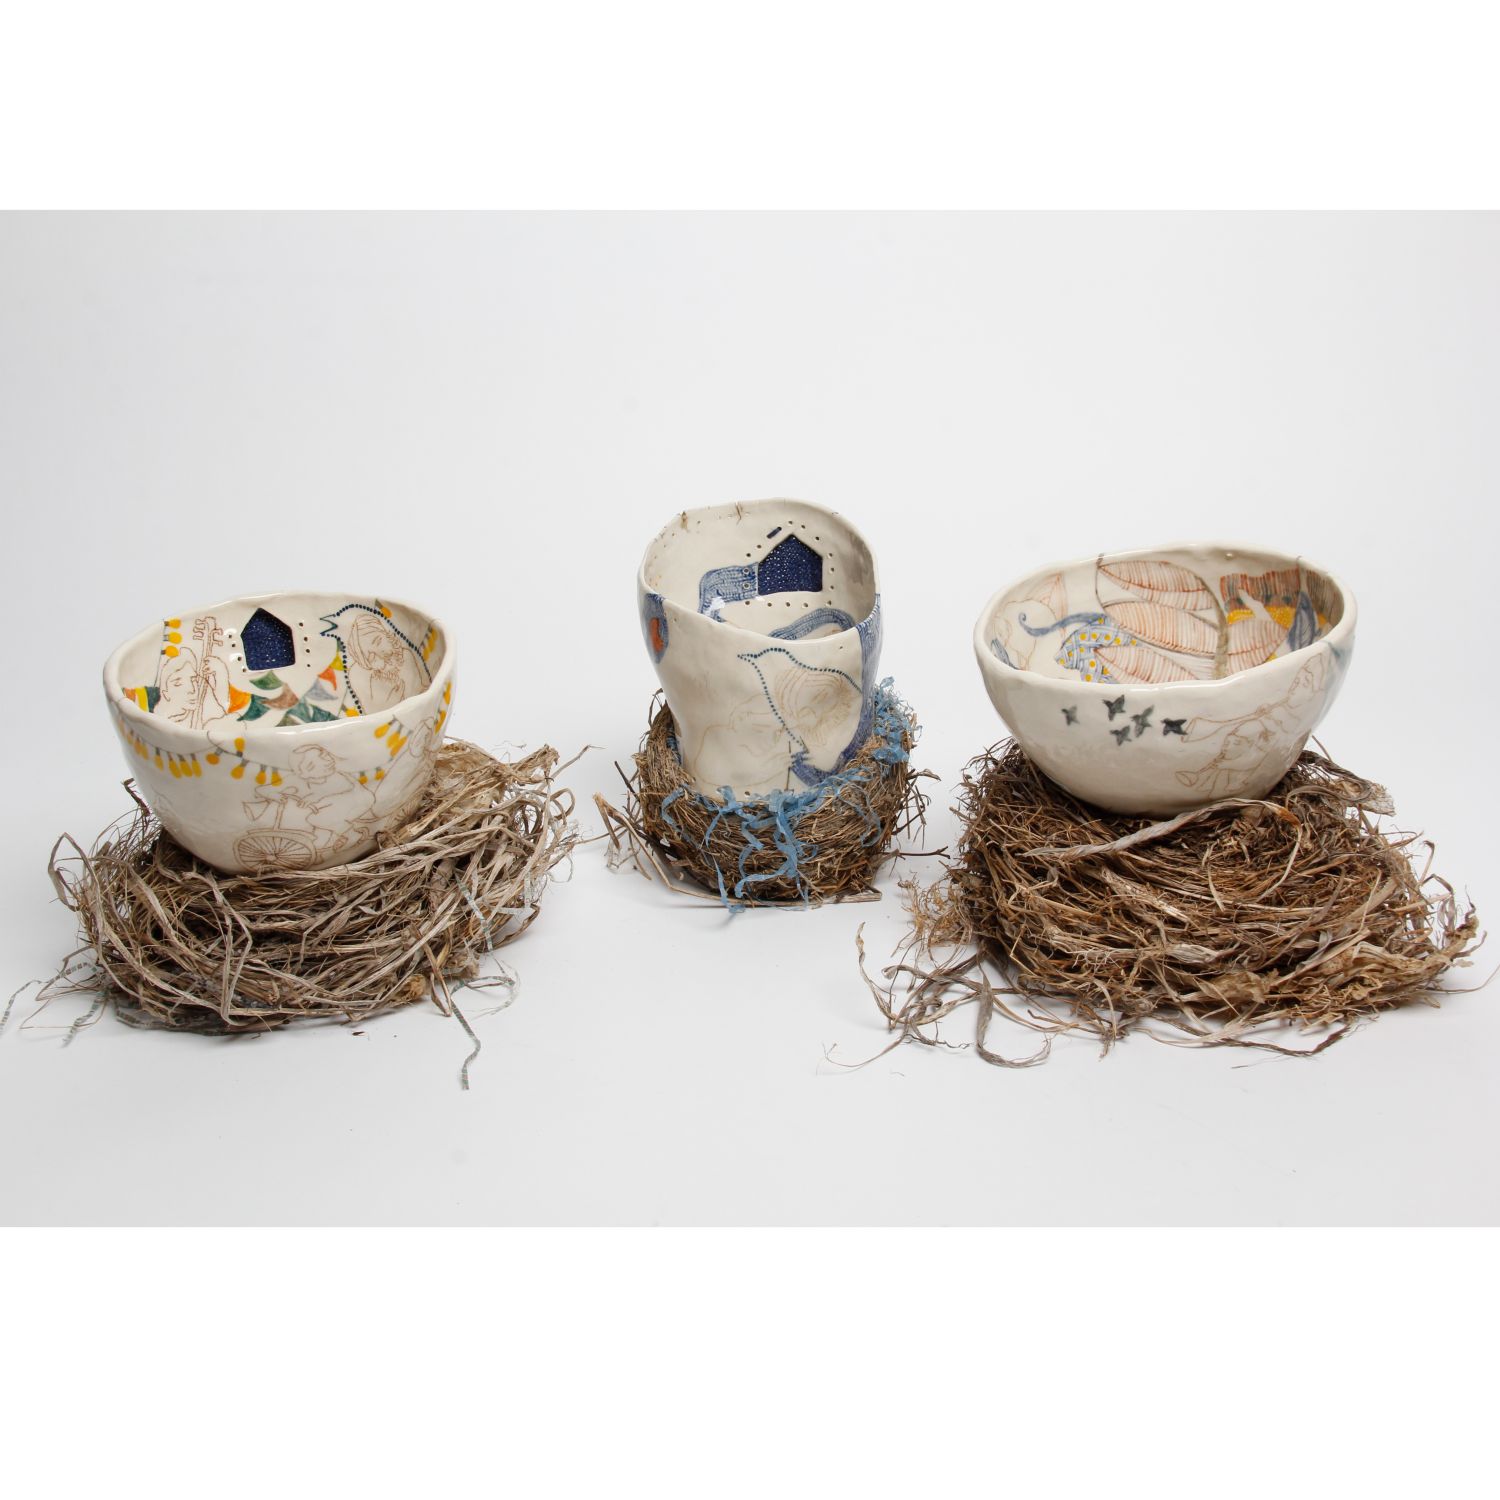 Japneet Kaur: Nesting Bowl – Hollow Bowl (Each sold separately) Product Image 1 of 7